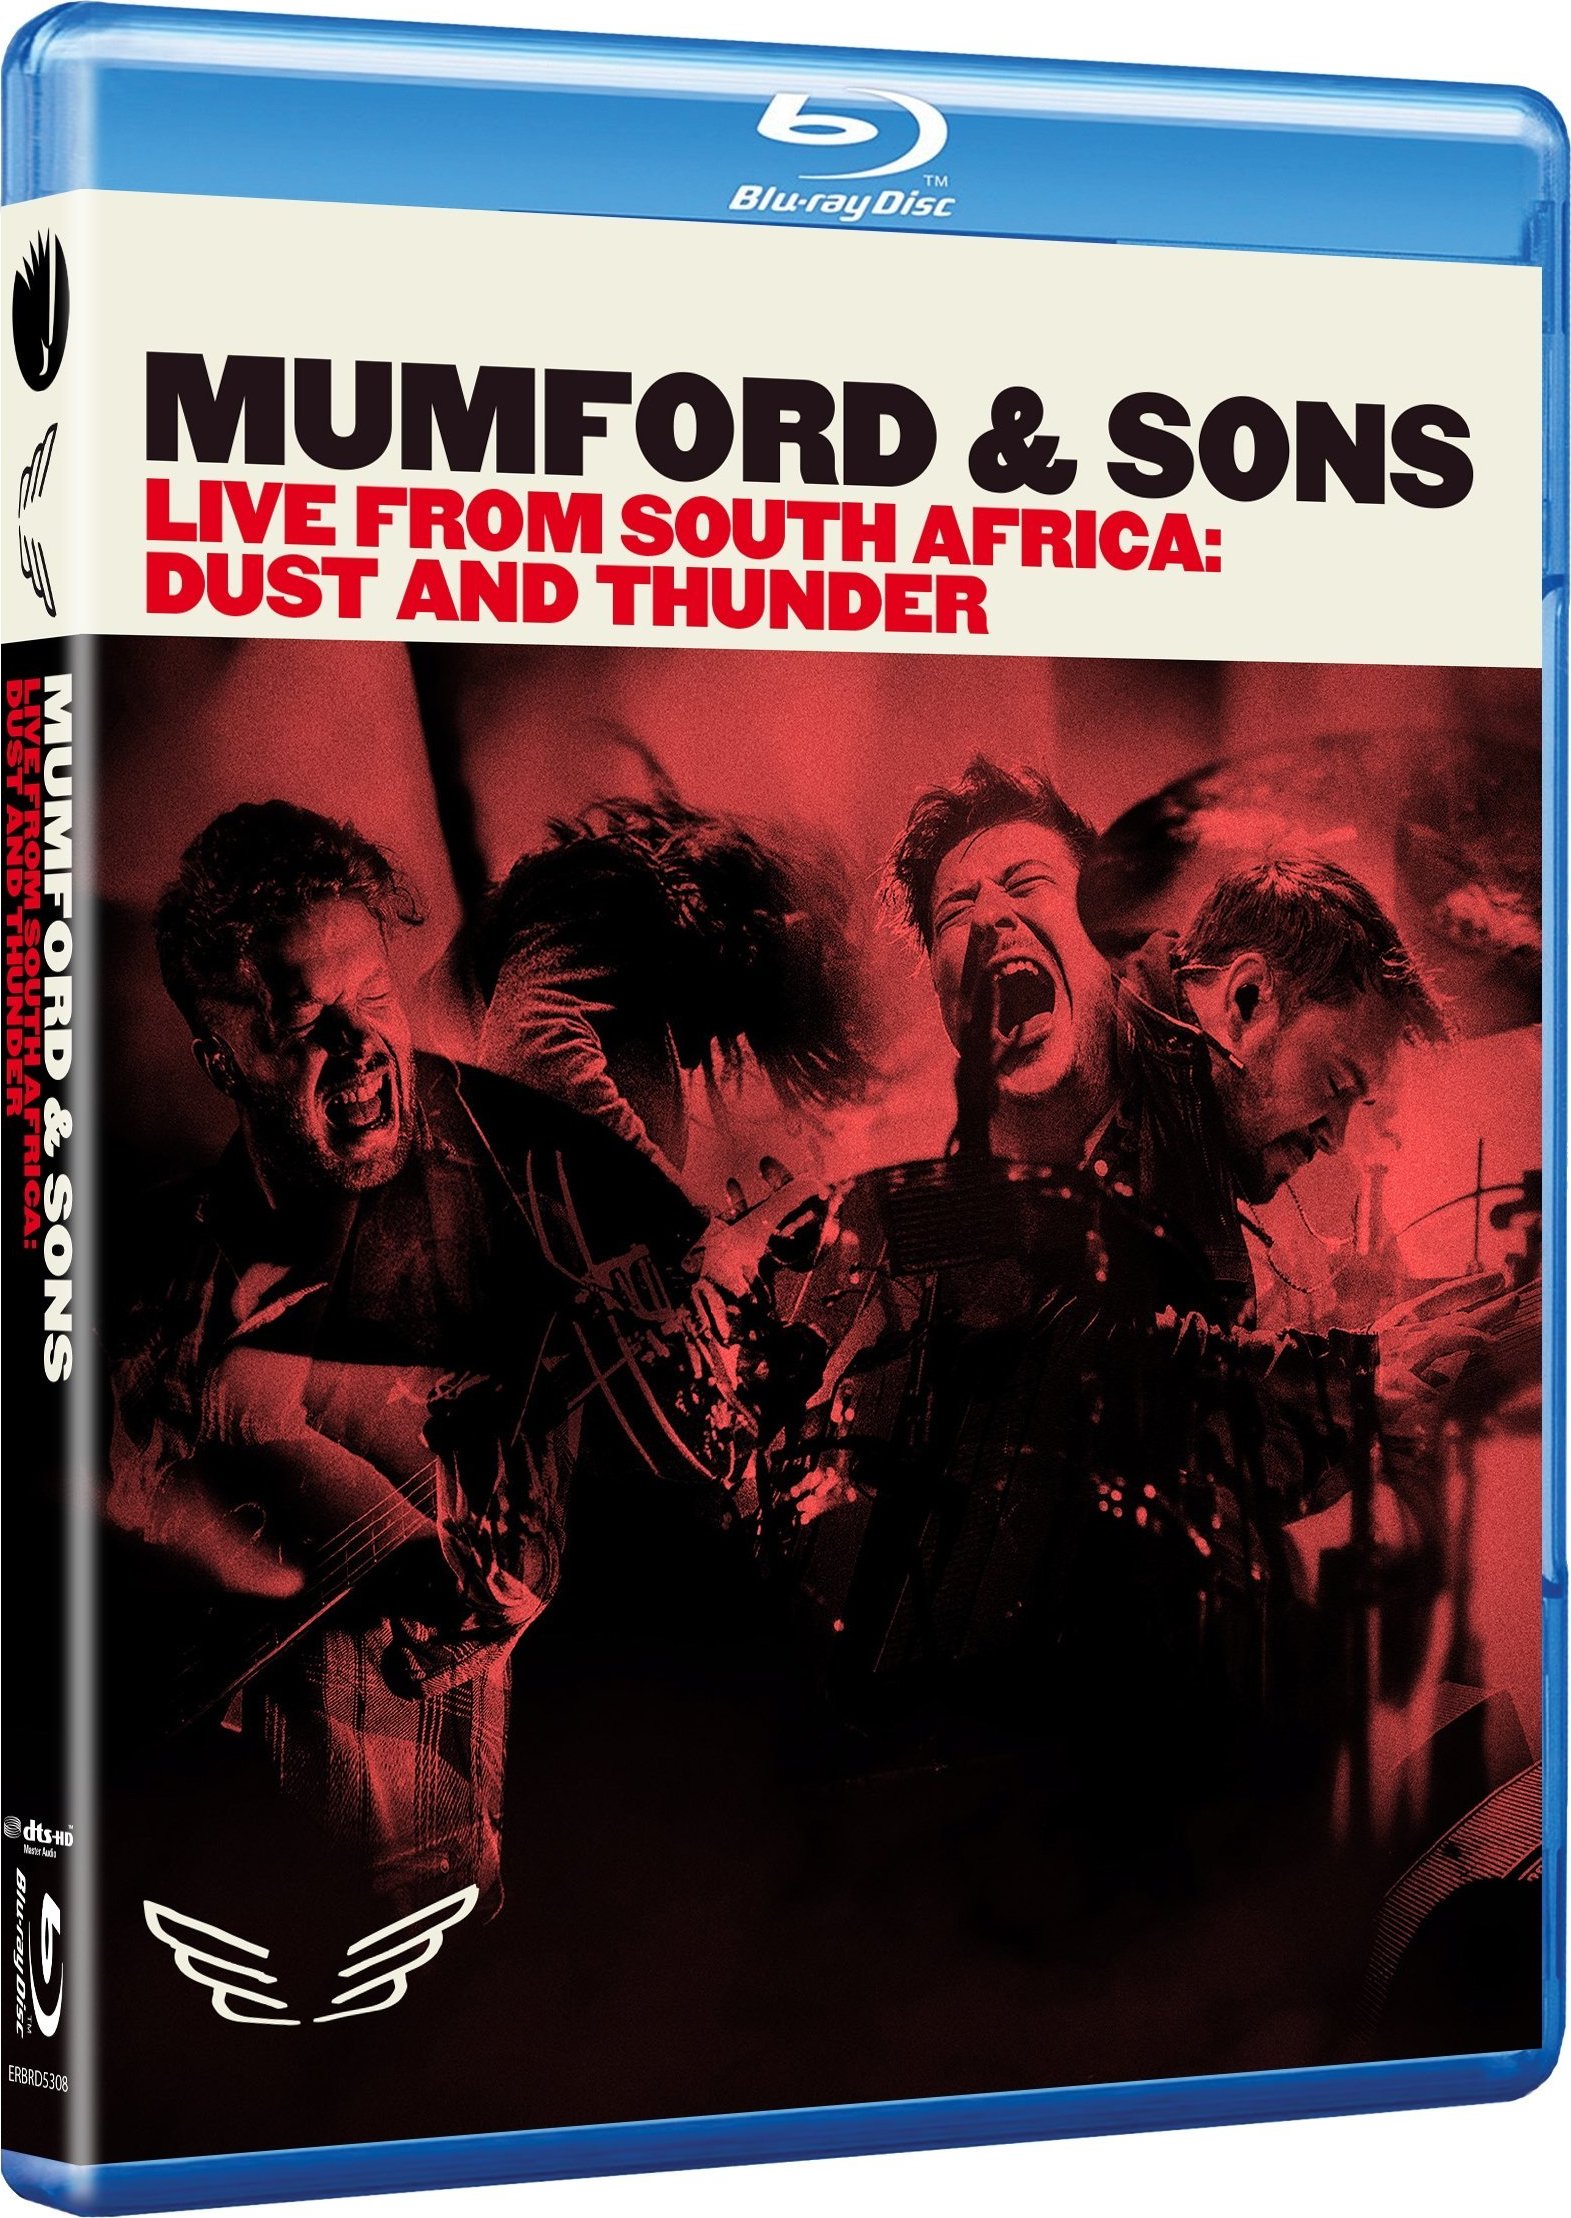 Mumford and sons dvd